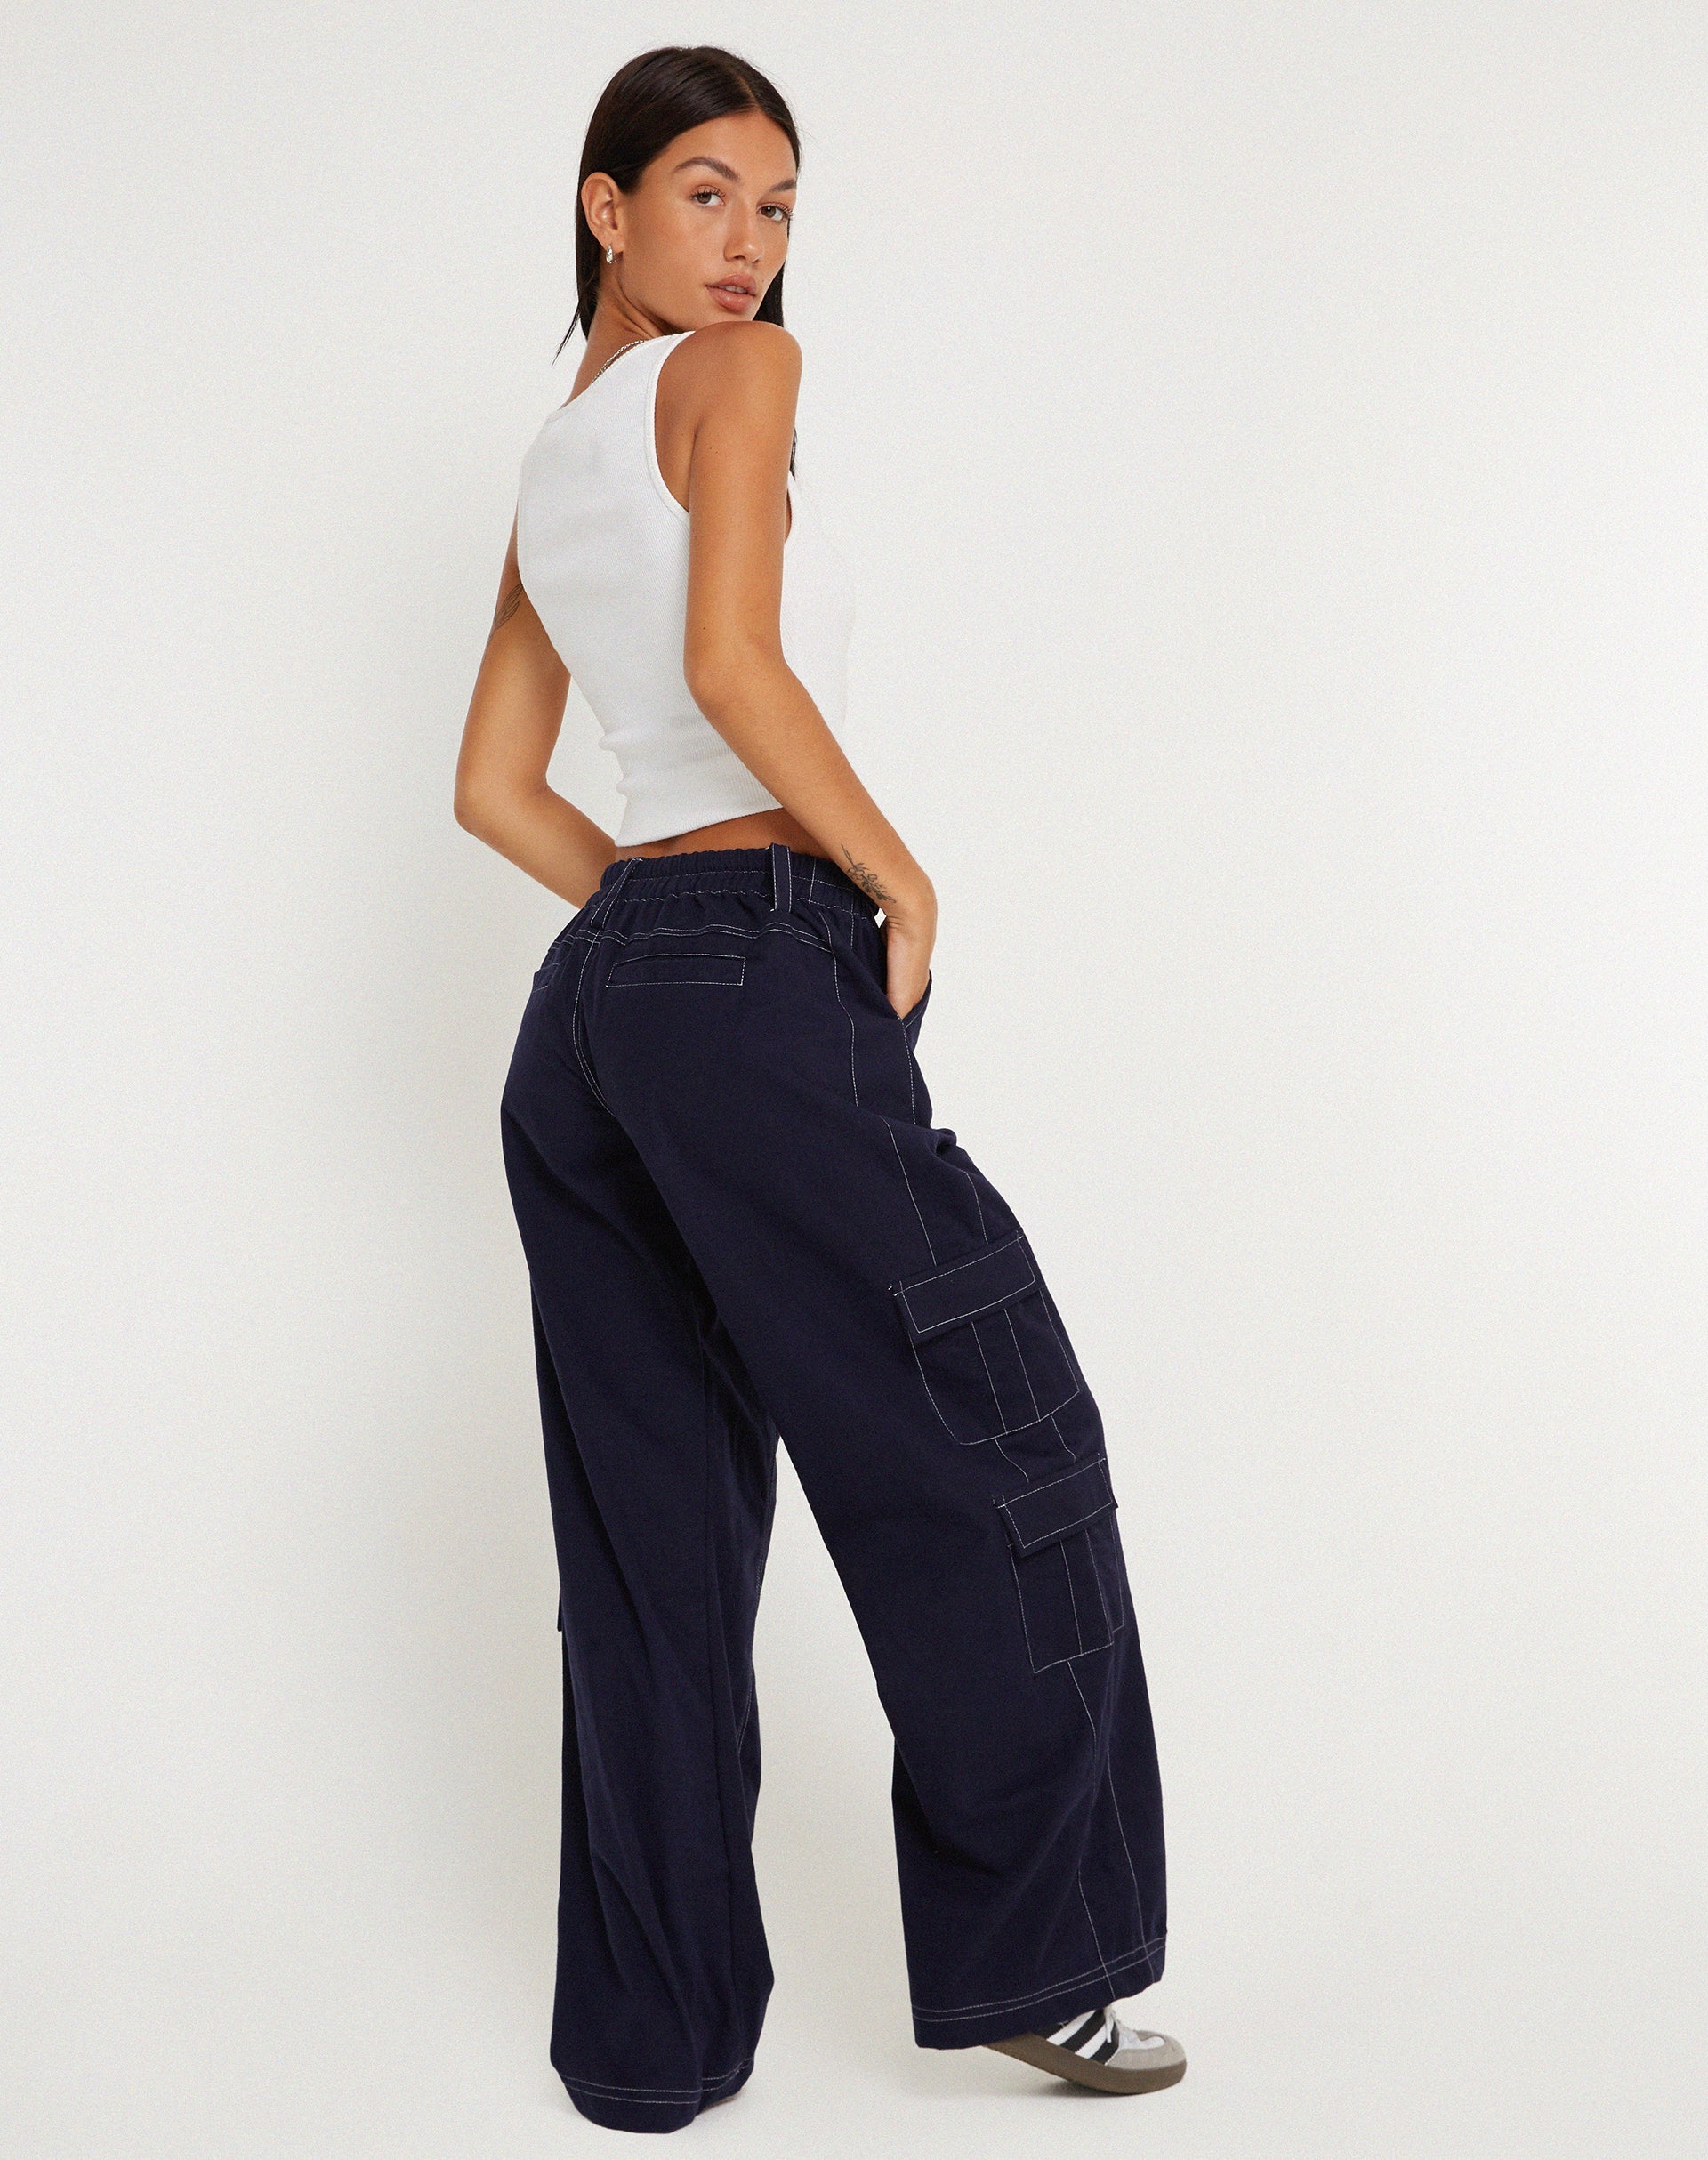 image of Hansa Trouser in Navy with Top White Stitch